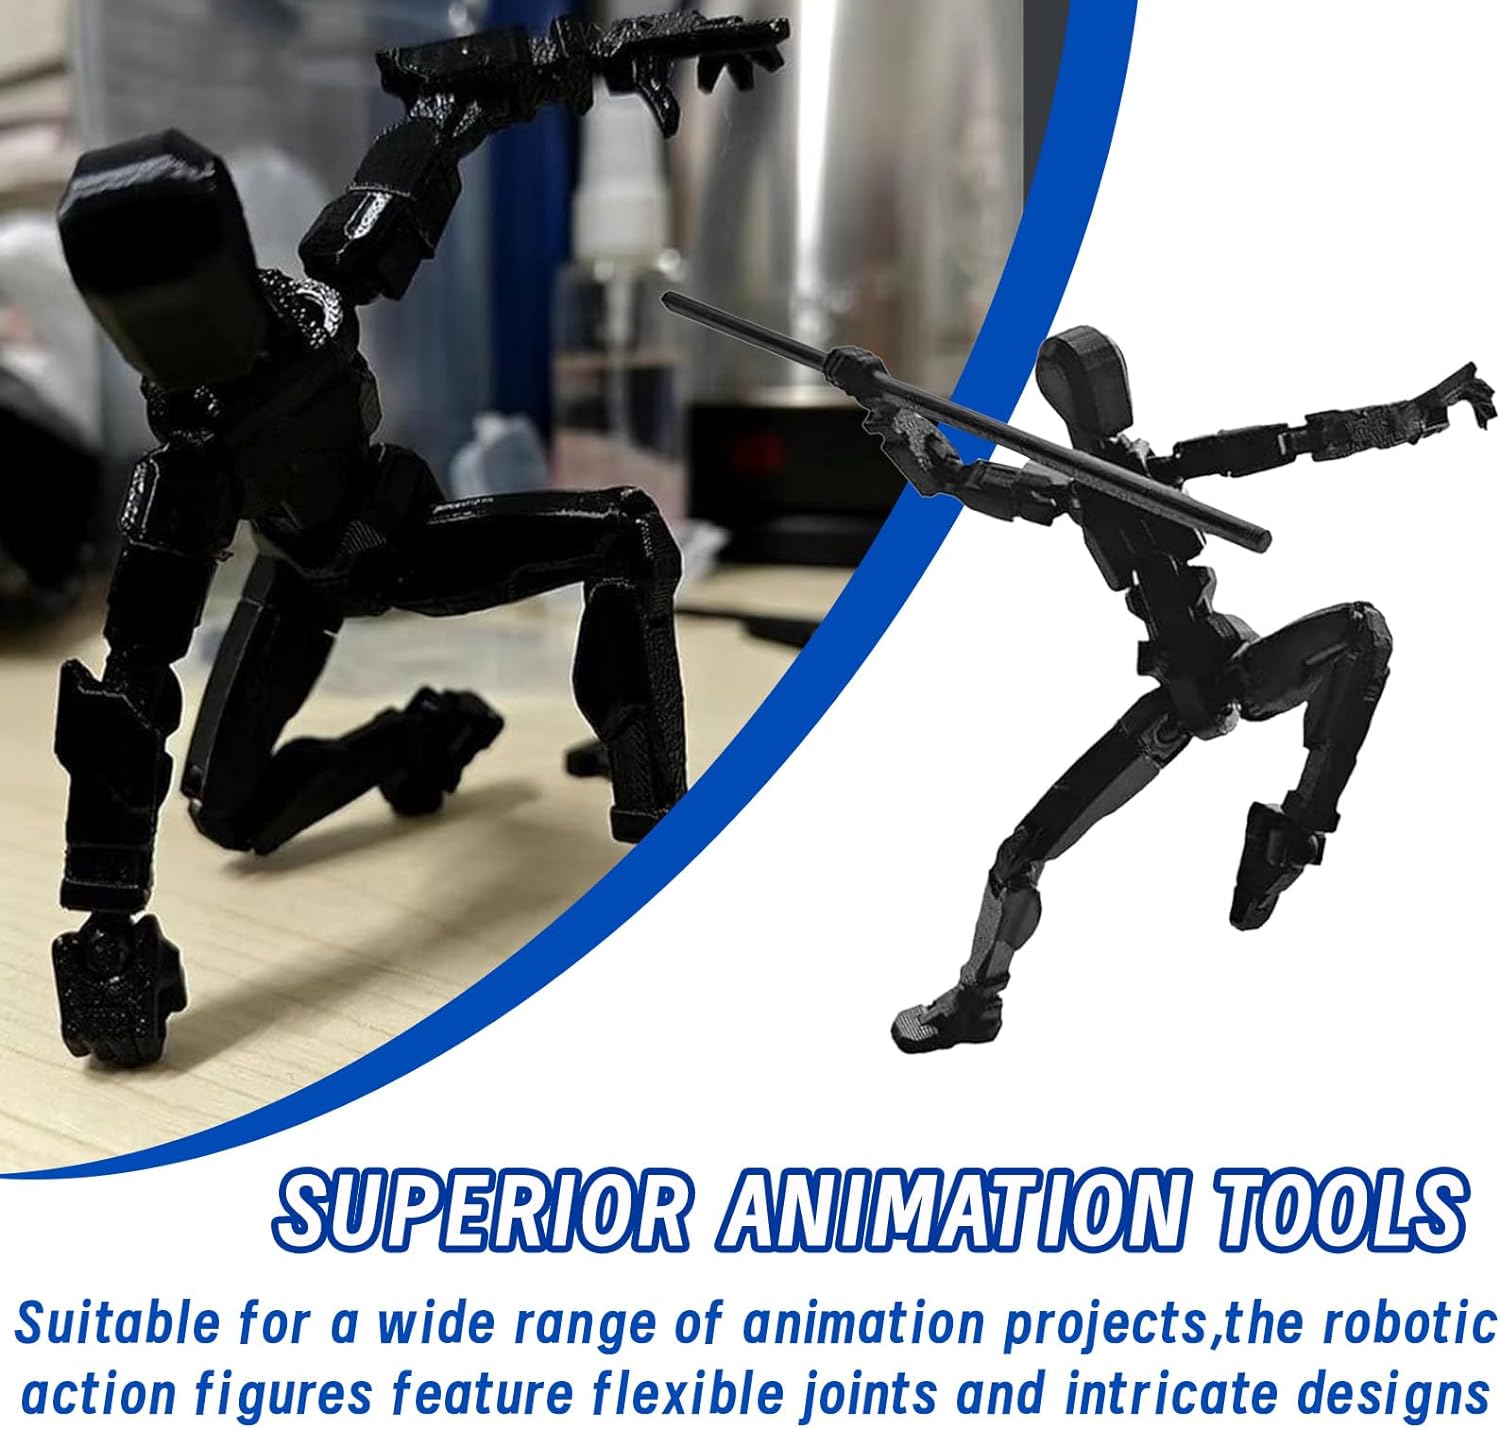 Titan 13 Action Figure, 4PCS Lucky 13 Action Figures, T13 Action Figure 3D Printed Robot Multi-Jointed Movable